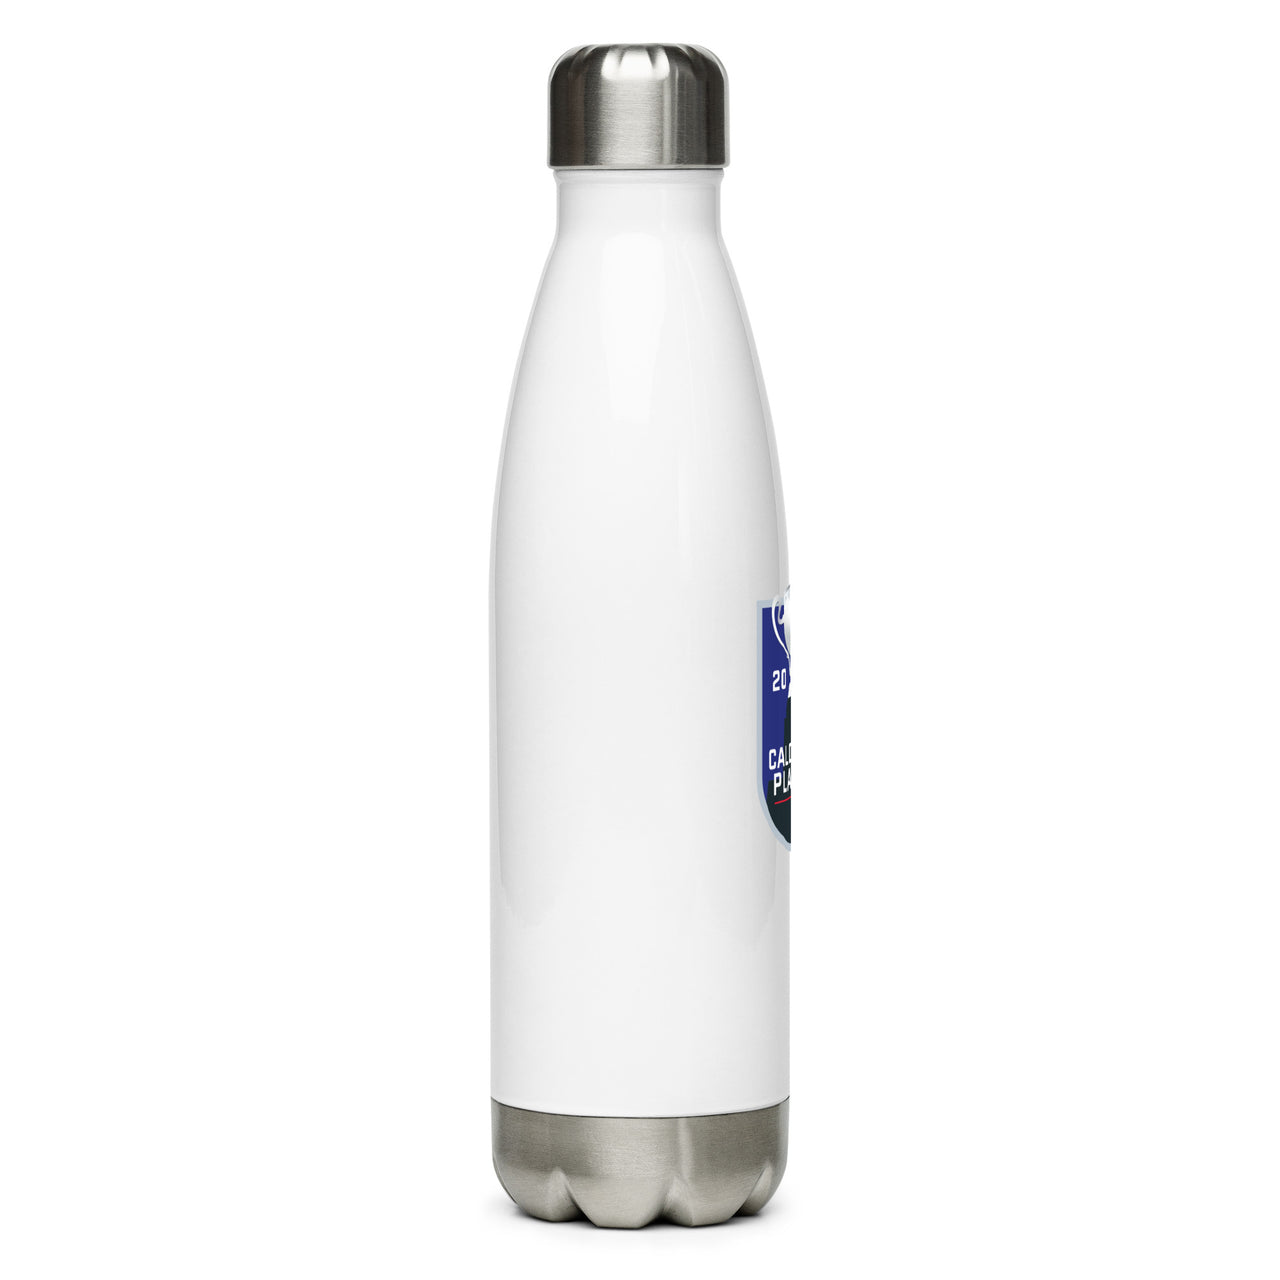 2024 Calder Cup Playoffs Primary Logo Stainless Steel Water Bottle